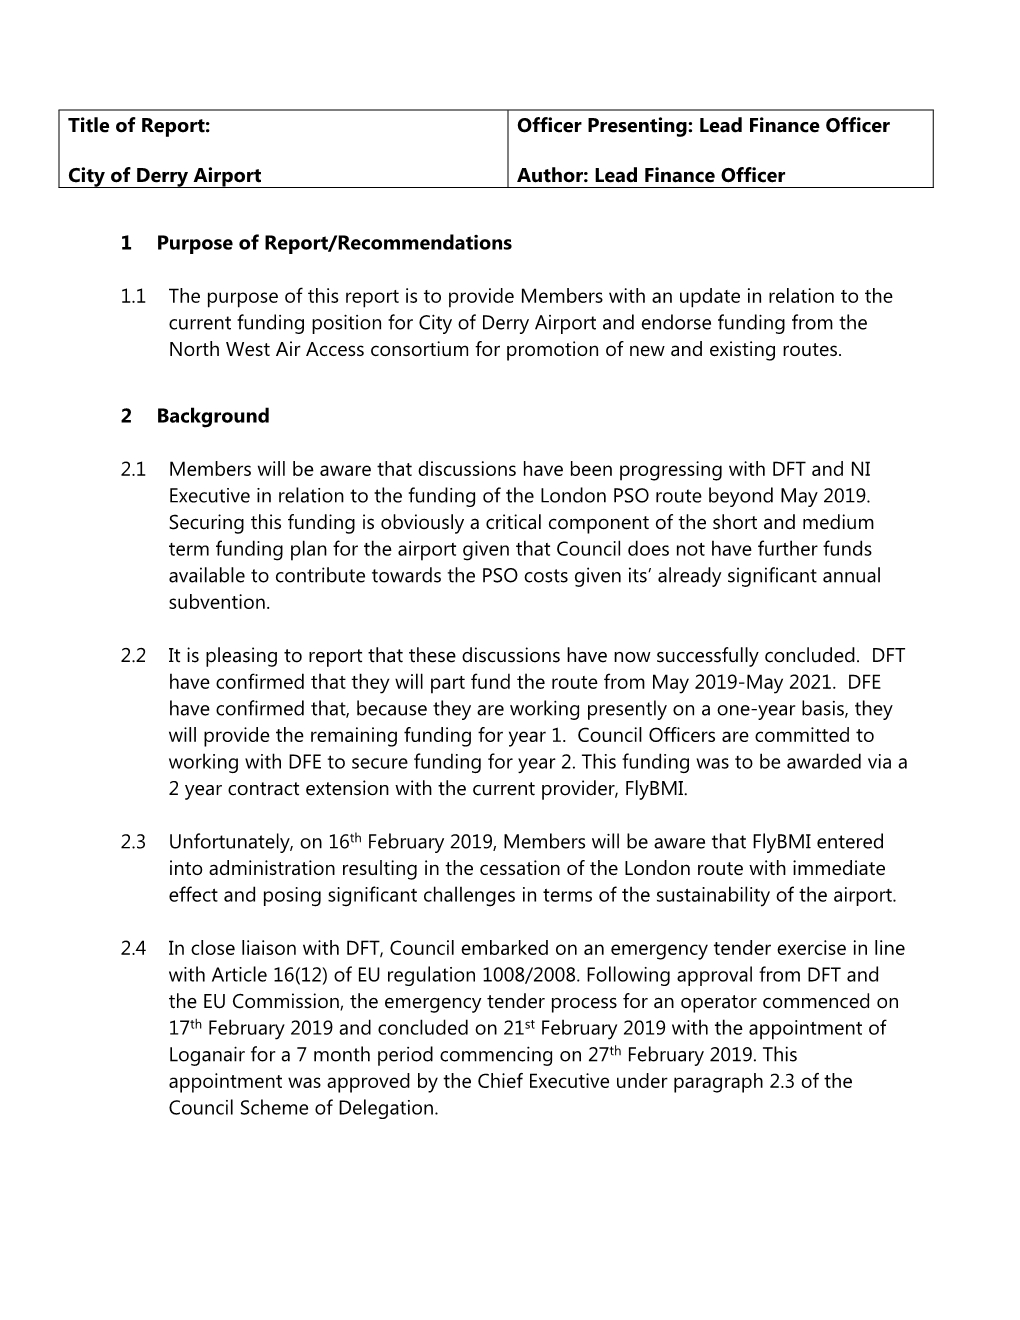 City of Derry Airport PDF 45 KB